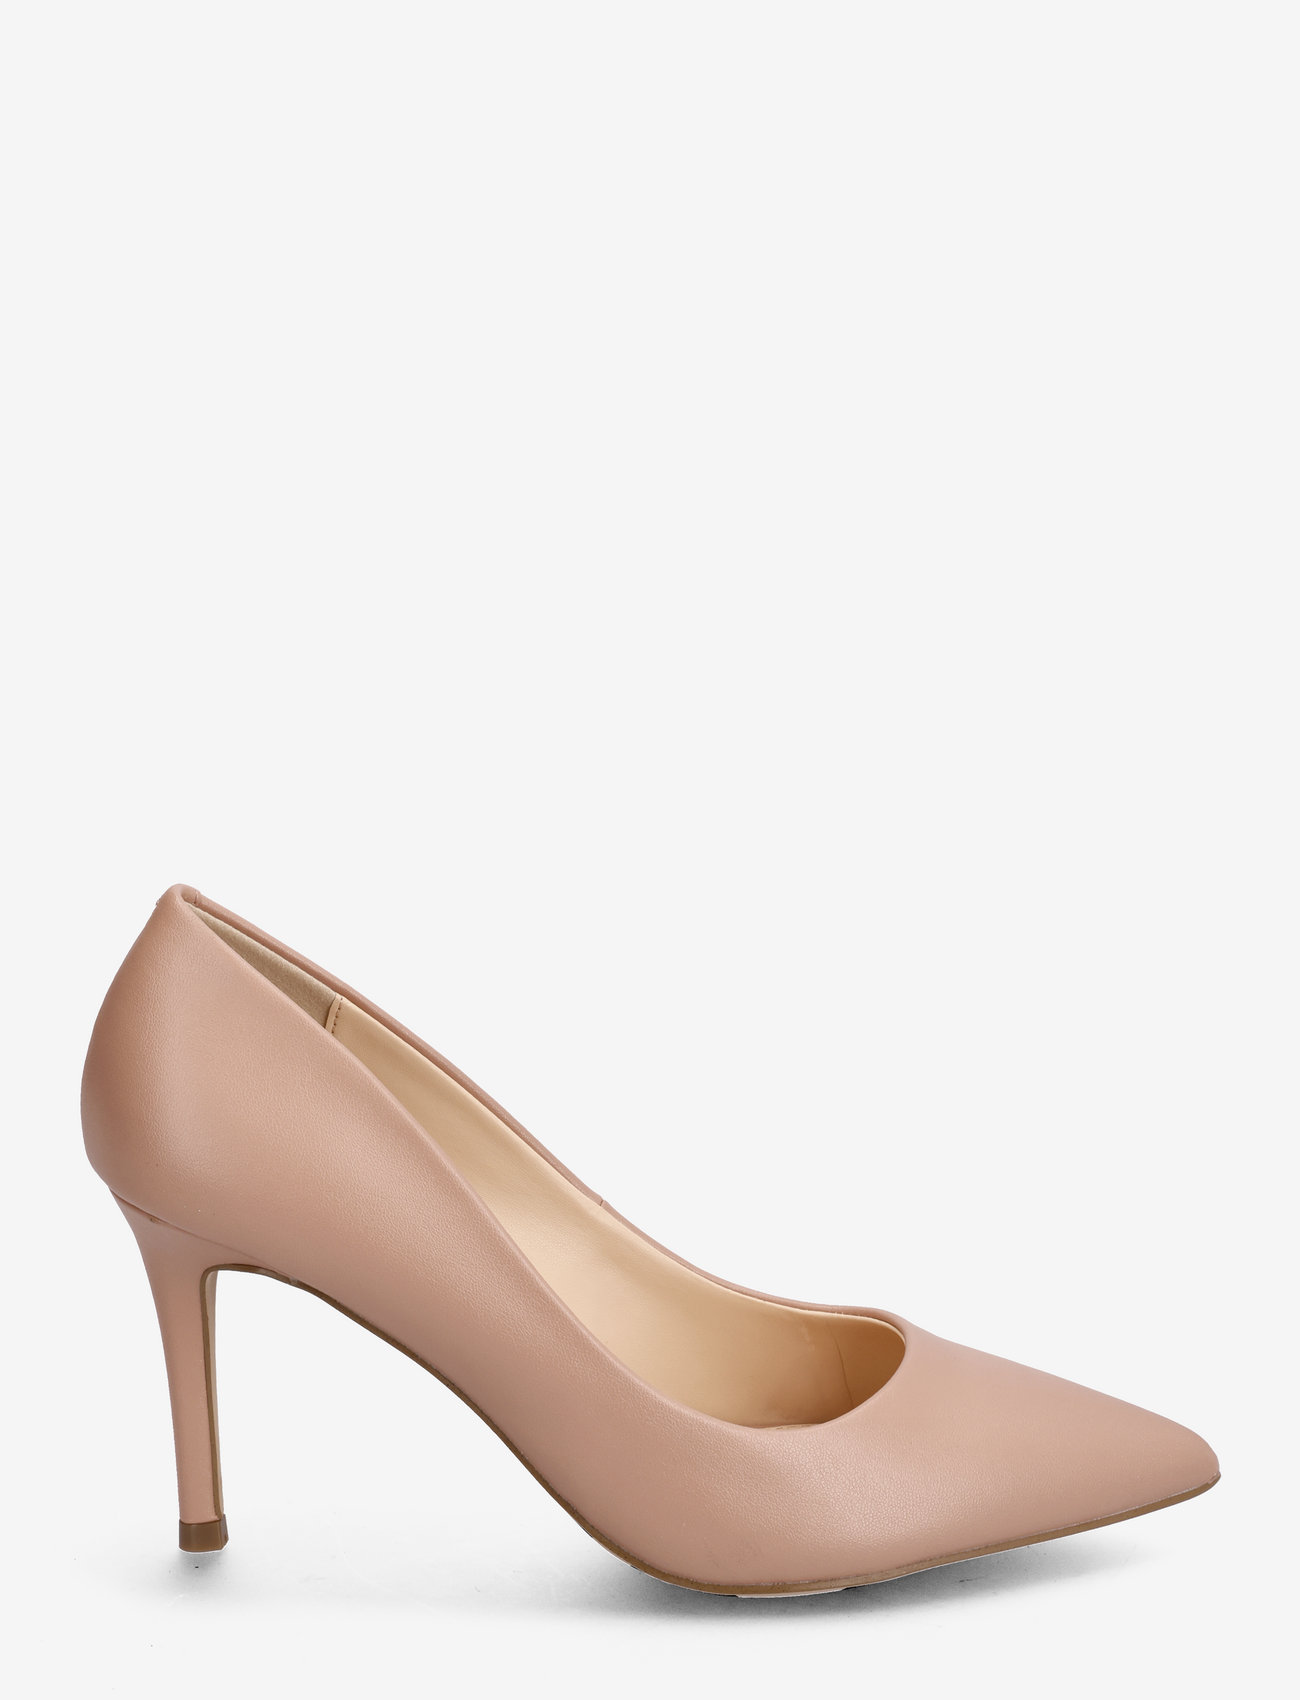 Steve Madden - Ladybug Pump - party wear at outlet prices - blush leather - 1